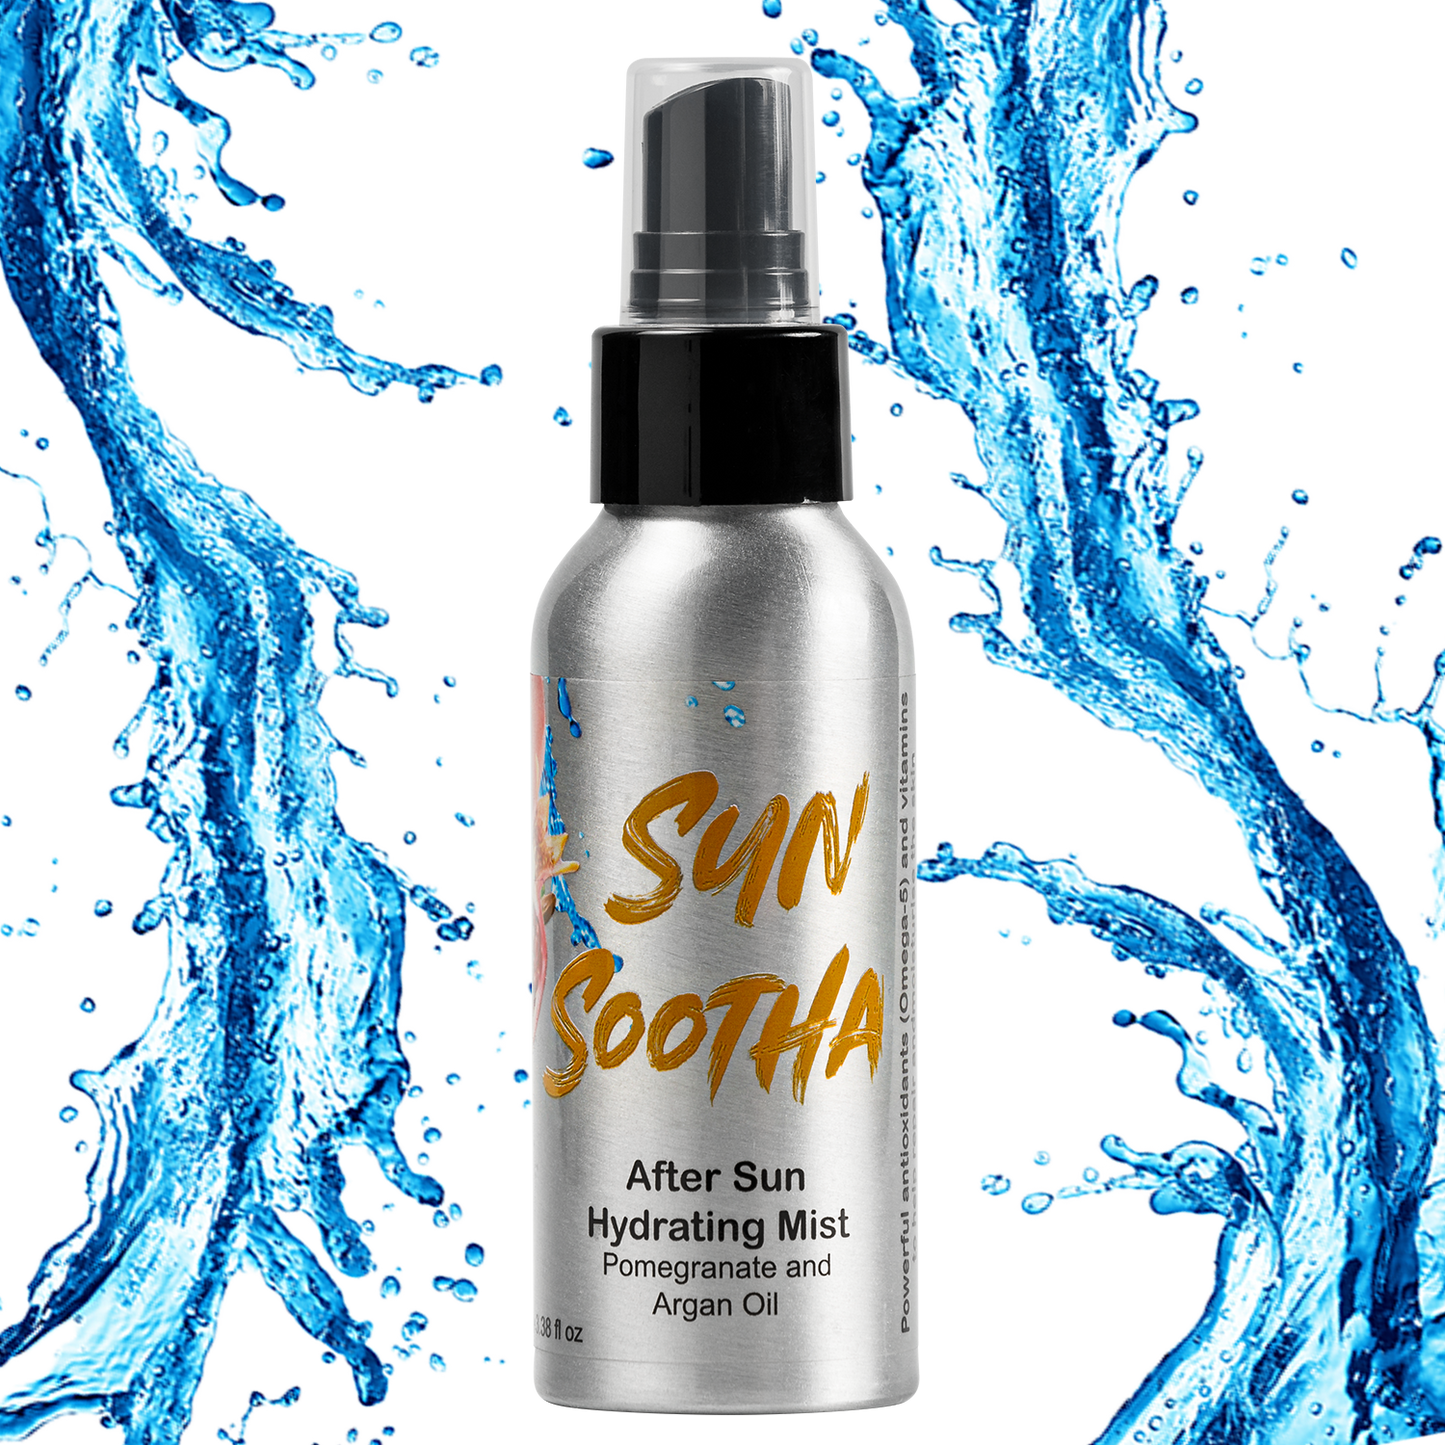 SunSootha AfterSun Mist for sunburn recovery and sunburn soothing. In a mist bottle for easier application. 